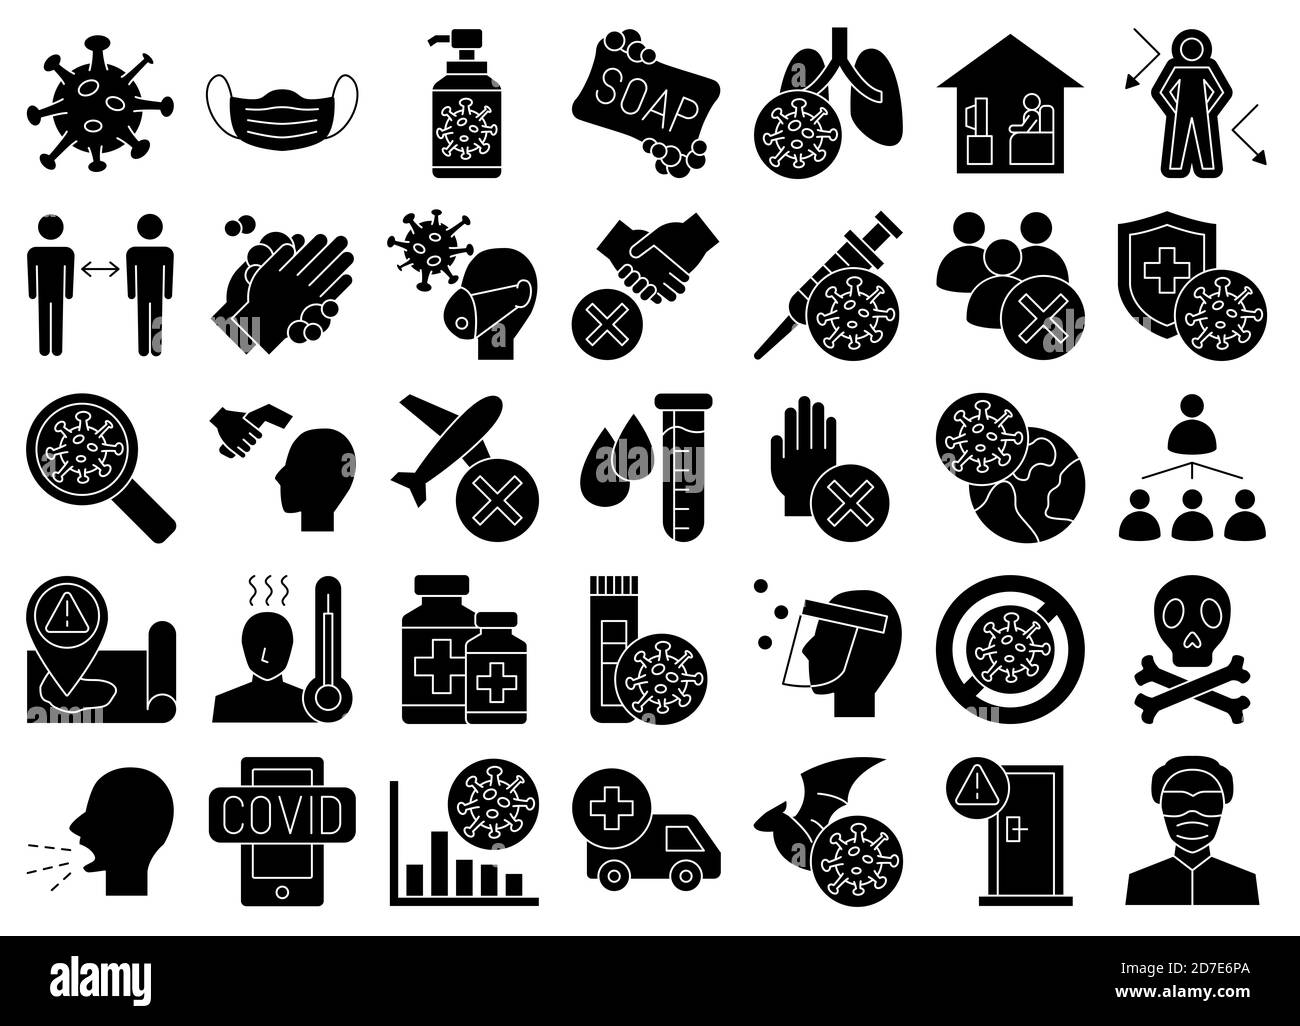 Corona Glyph Iconset Banque D'Images